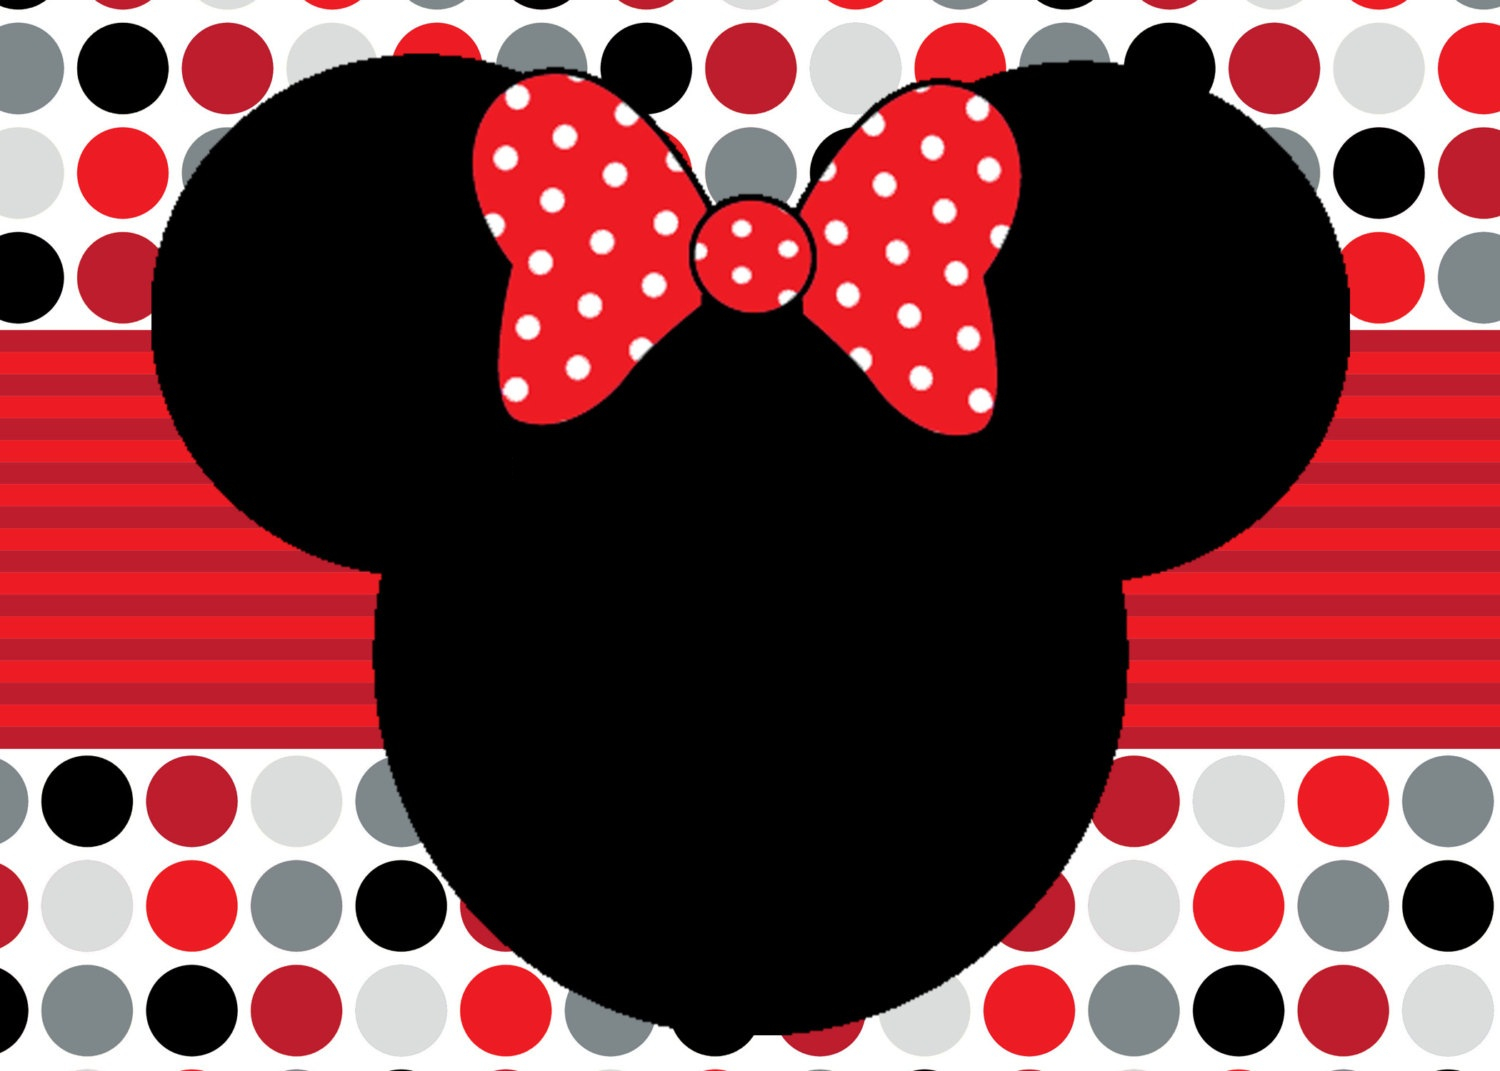 Free Printable Mickey Mouse Birthday Cards